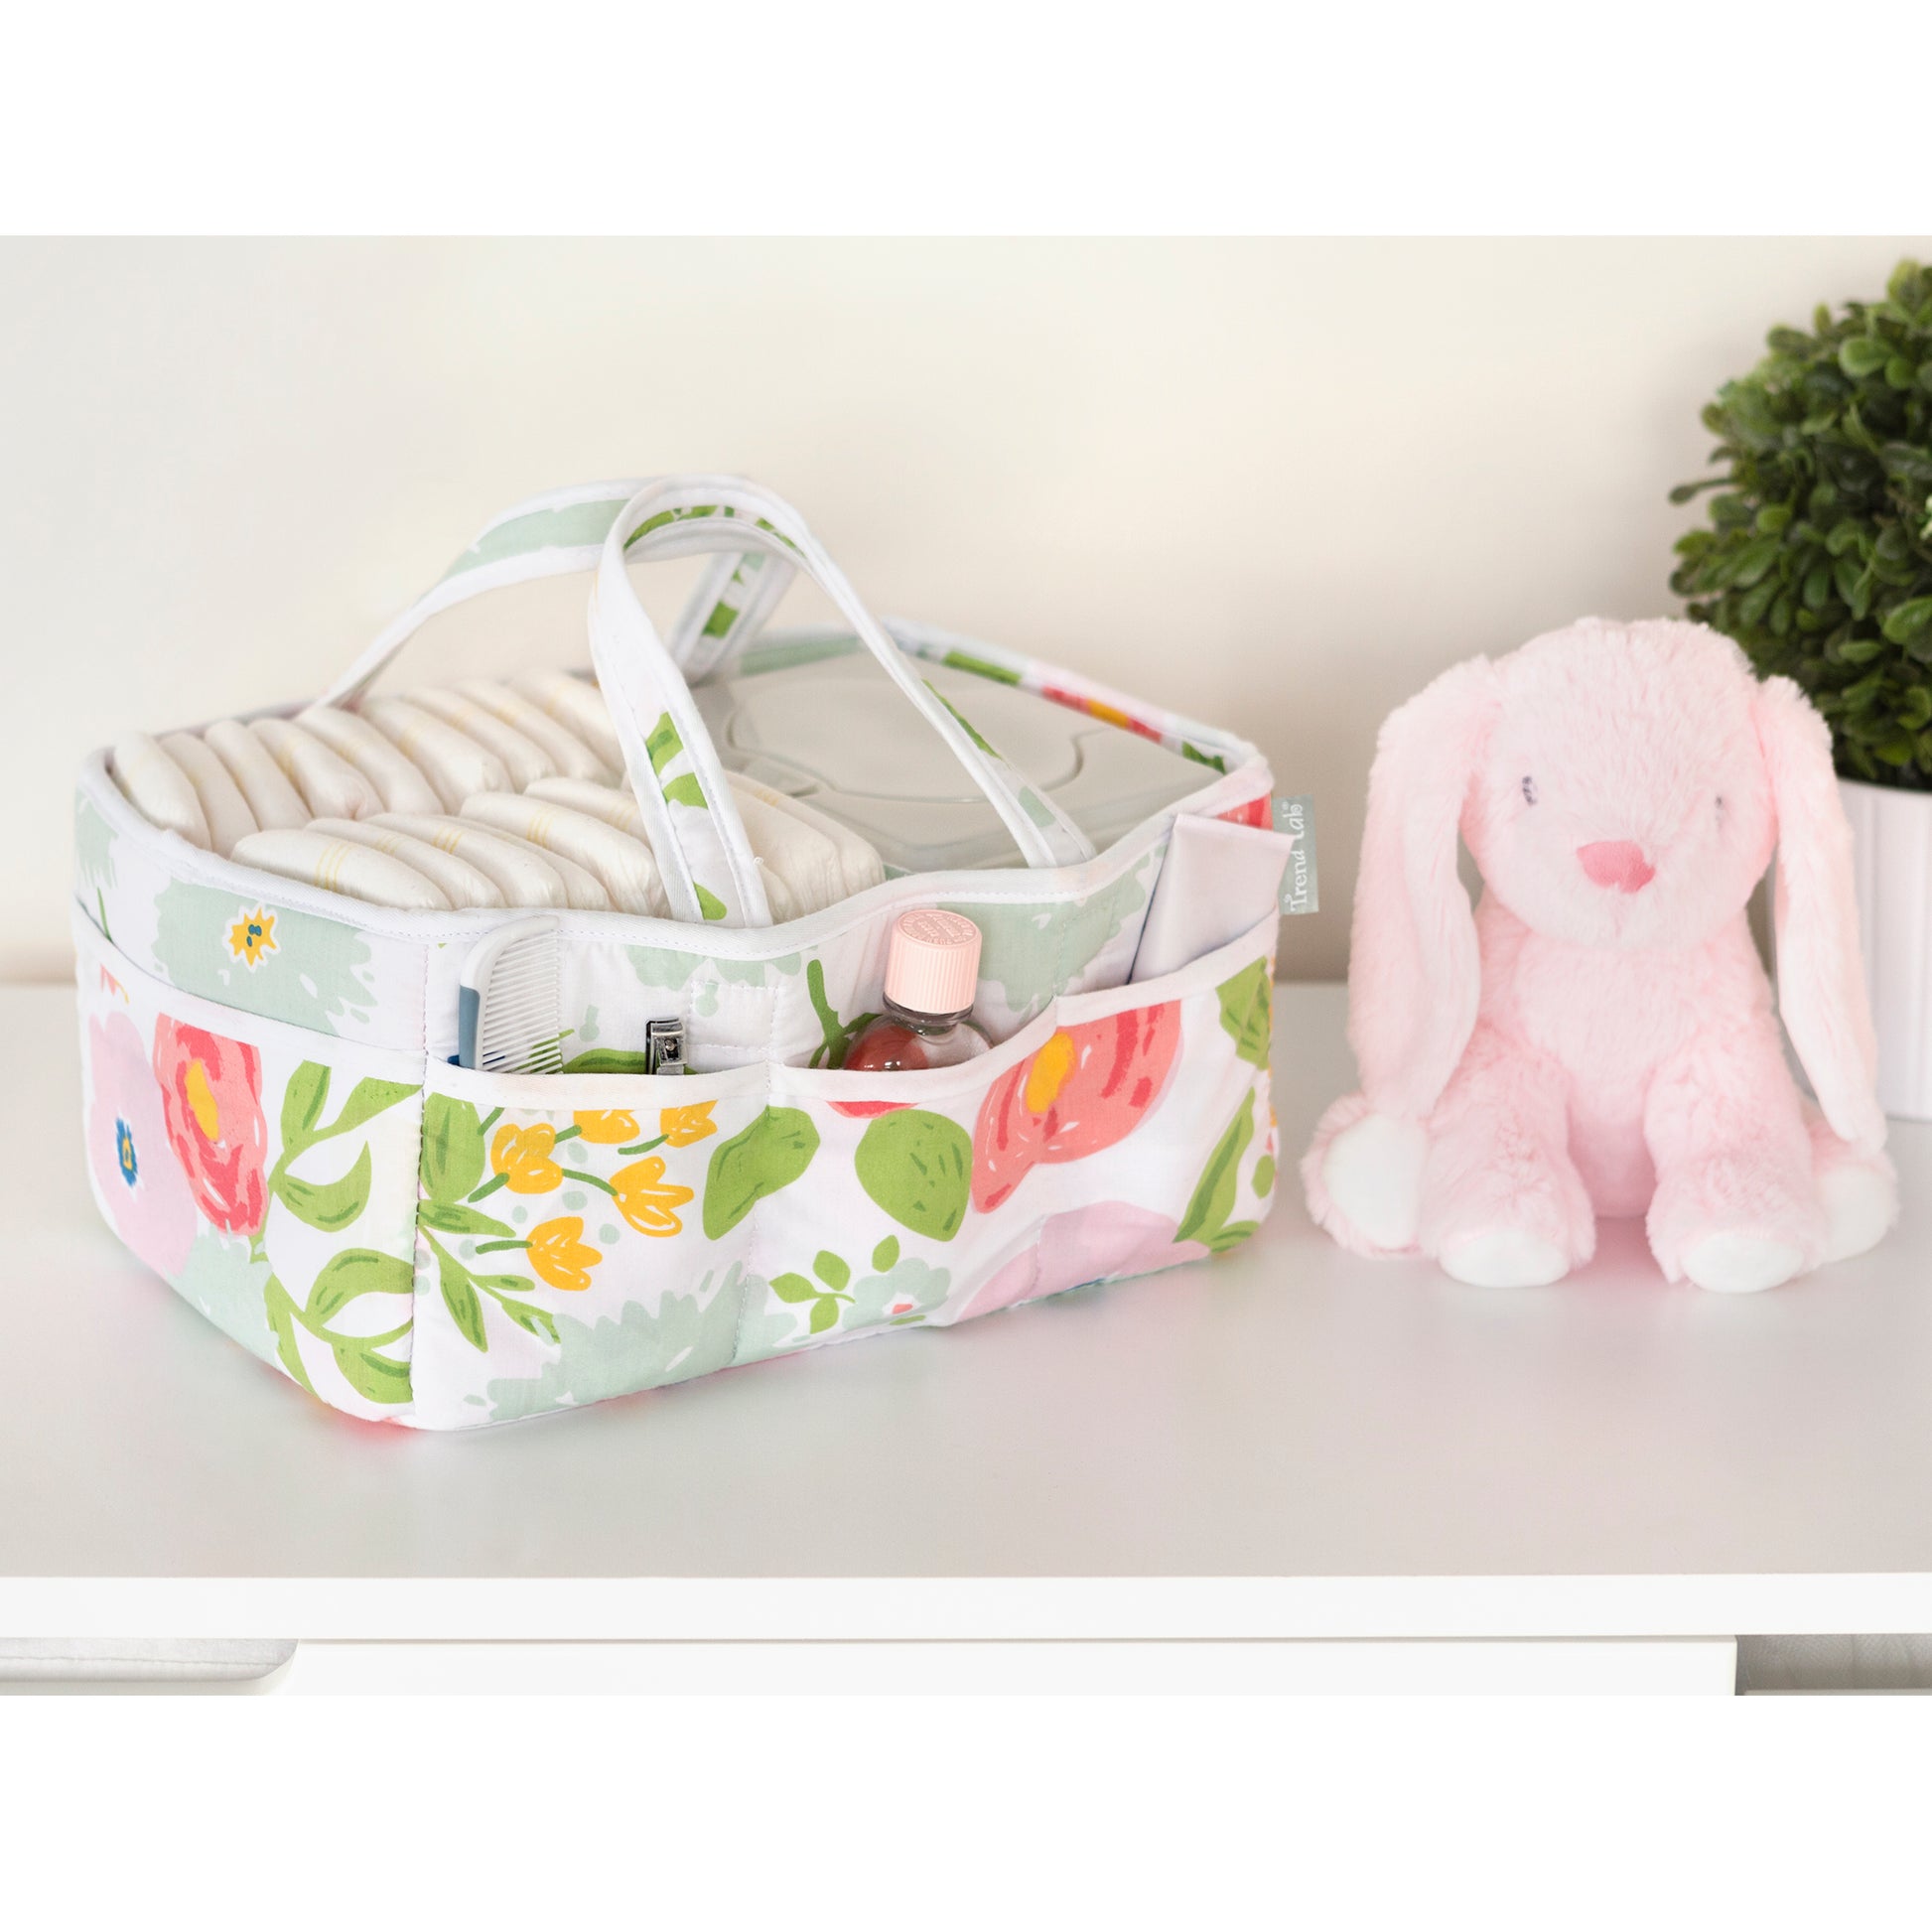  Floral Storage Caddy- stylized in room usage view